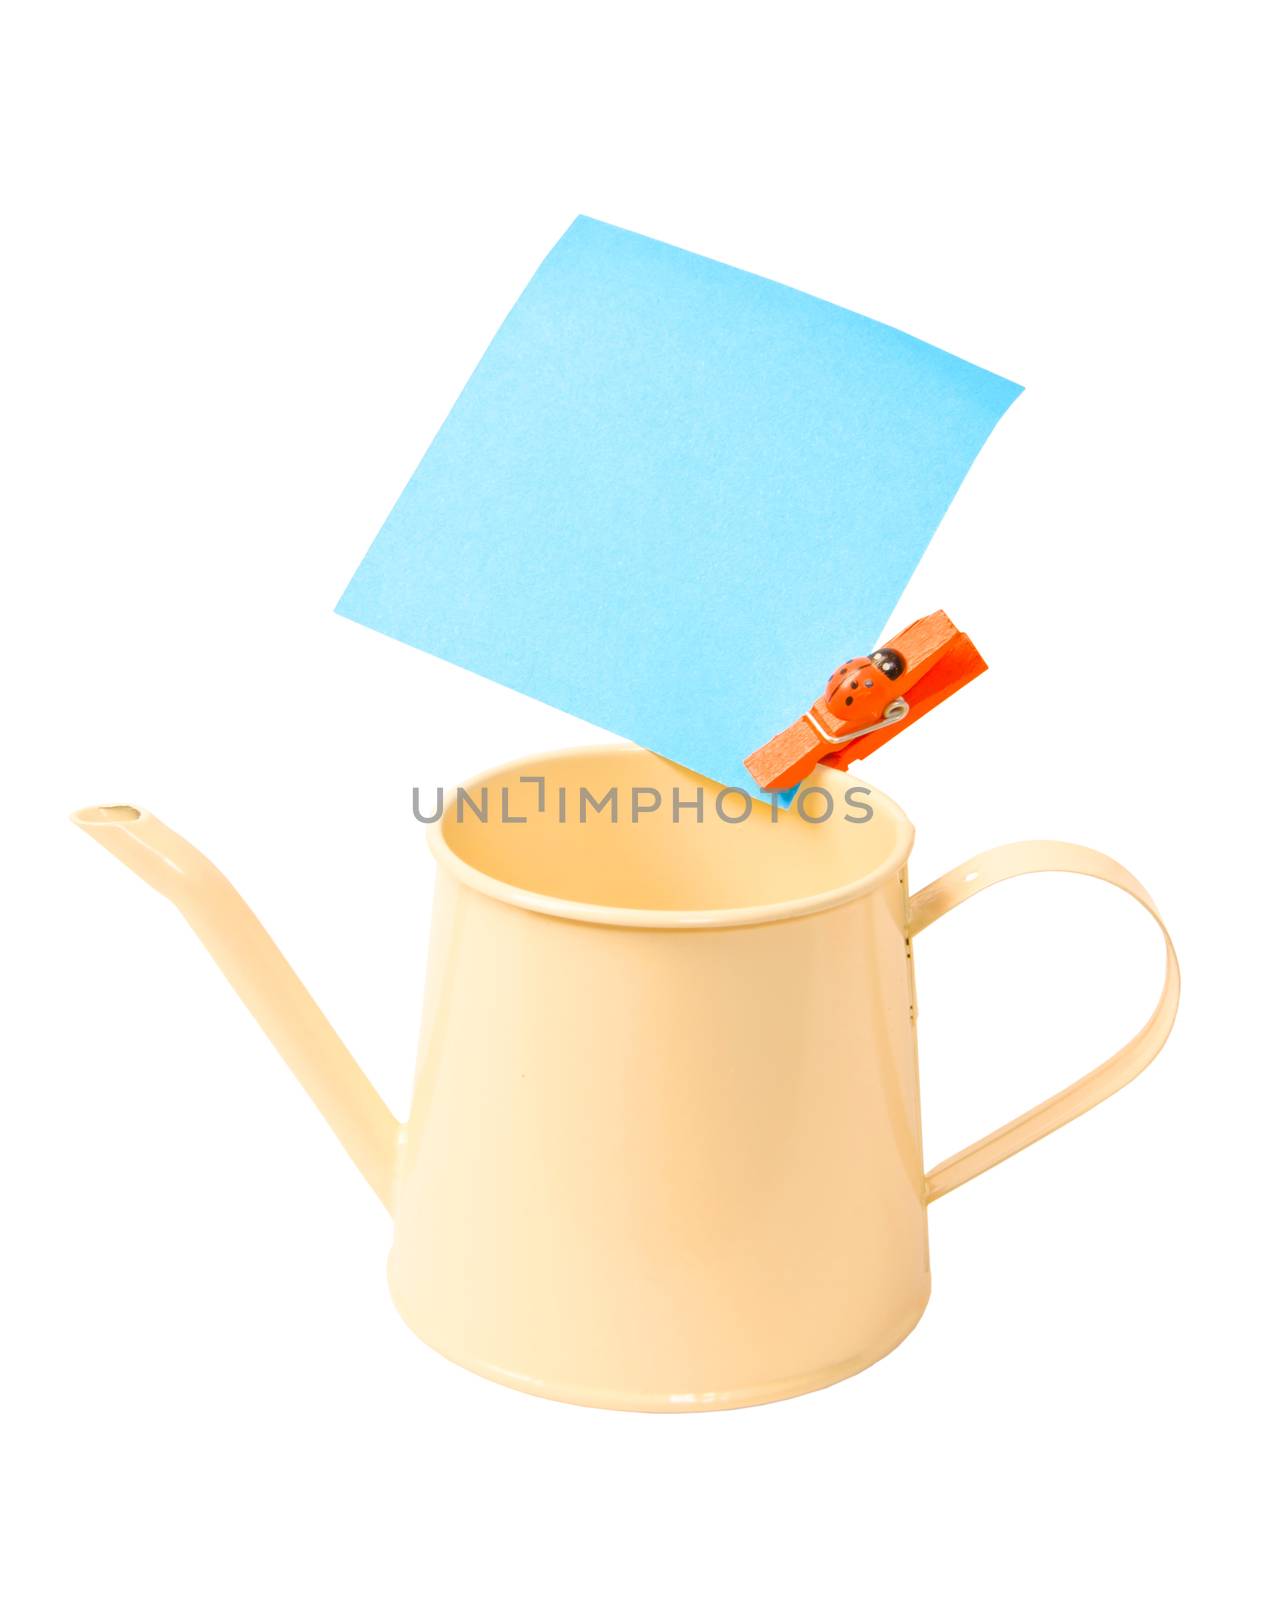 paper card and watering can by Gamjai